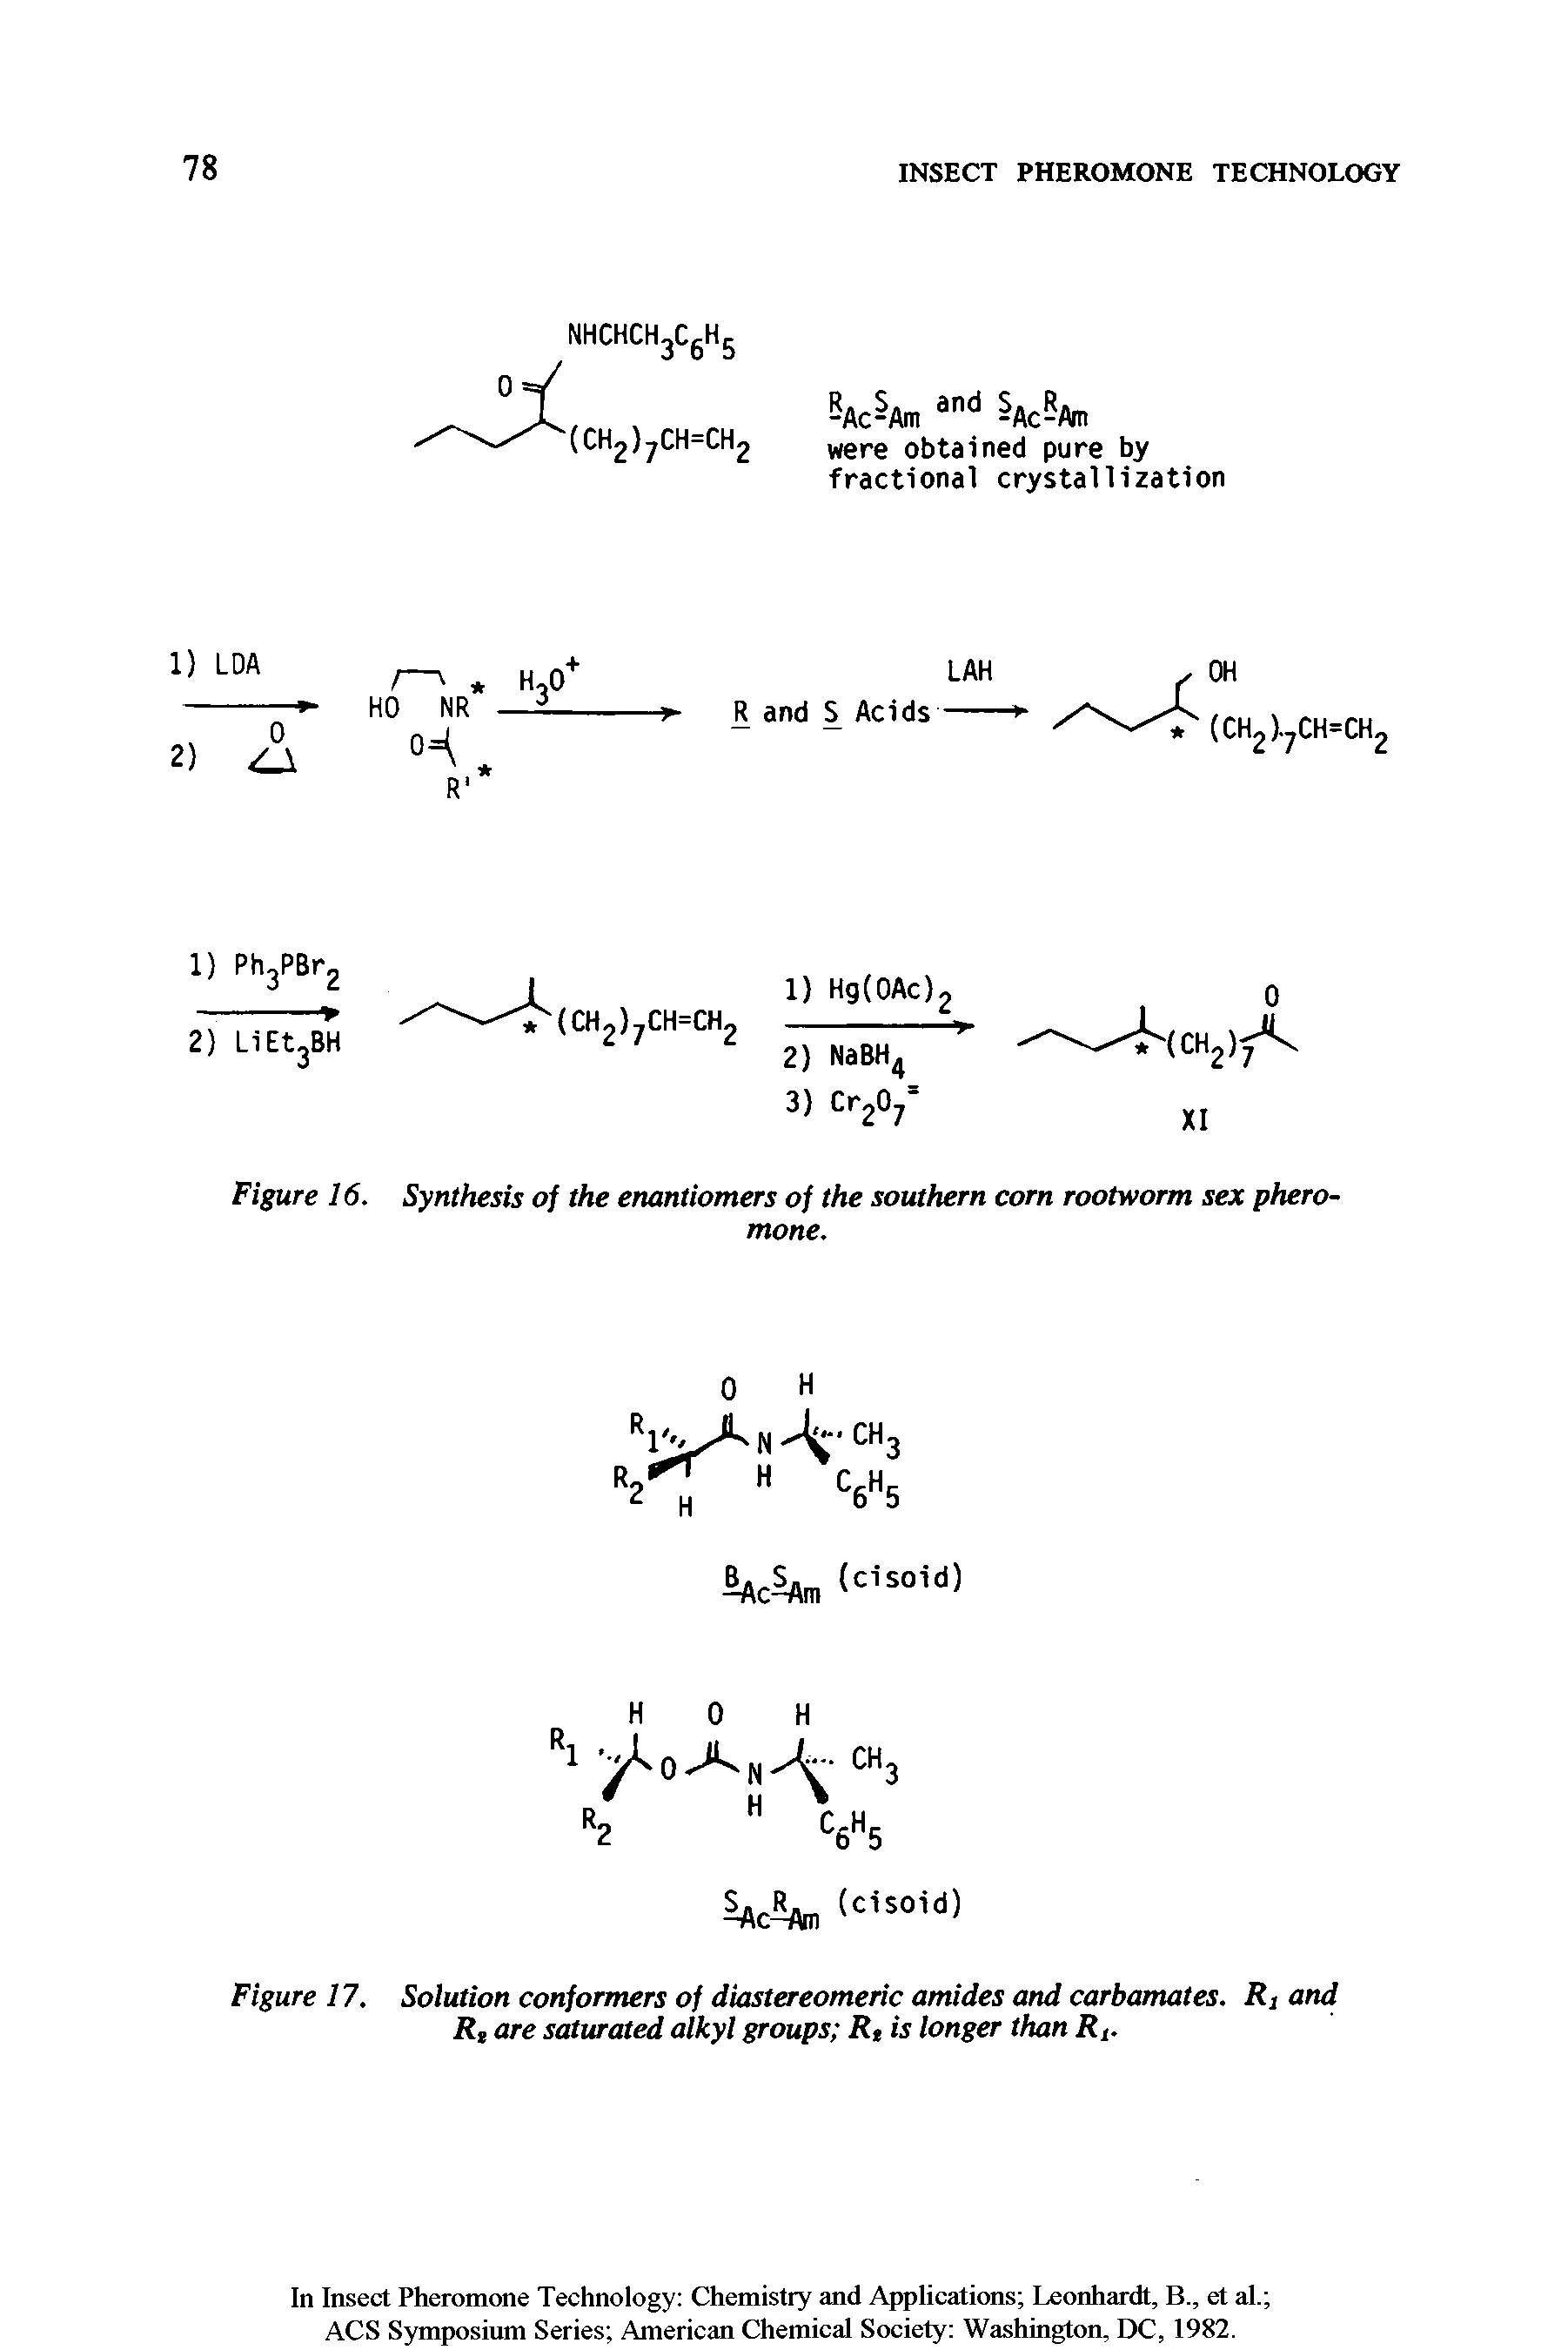 Figure 17. Solution conformers of diastereomeric amides and carbamates. Rj and Rt are saturated alkyl groups Rt is longer than R,.